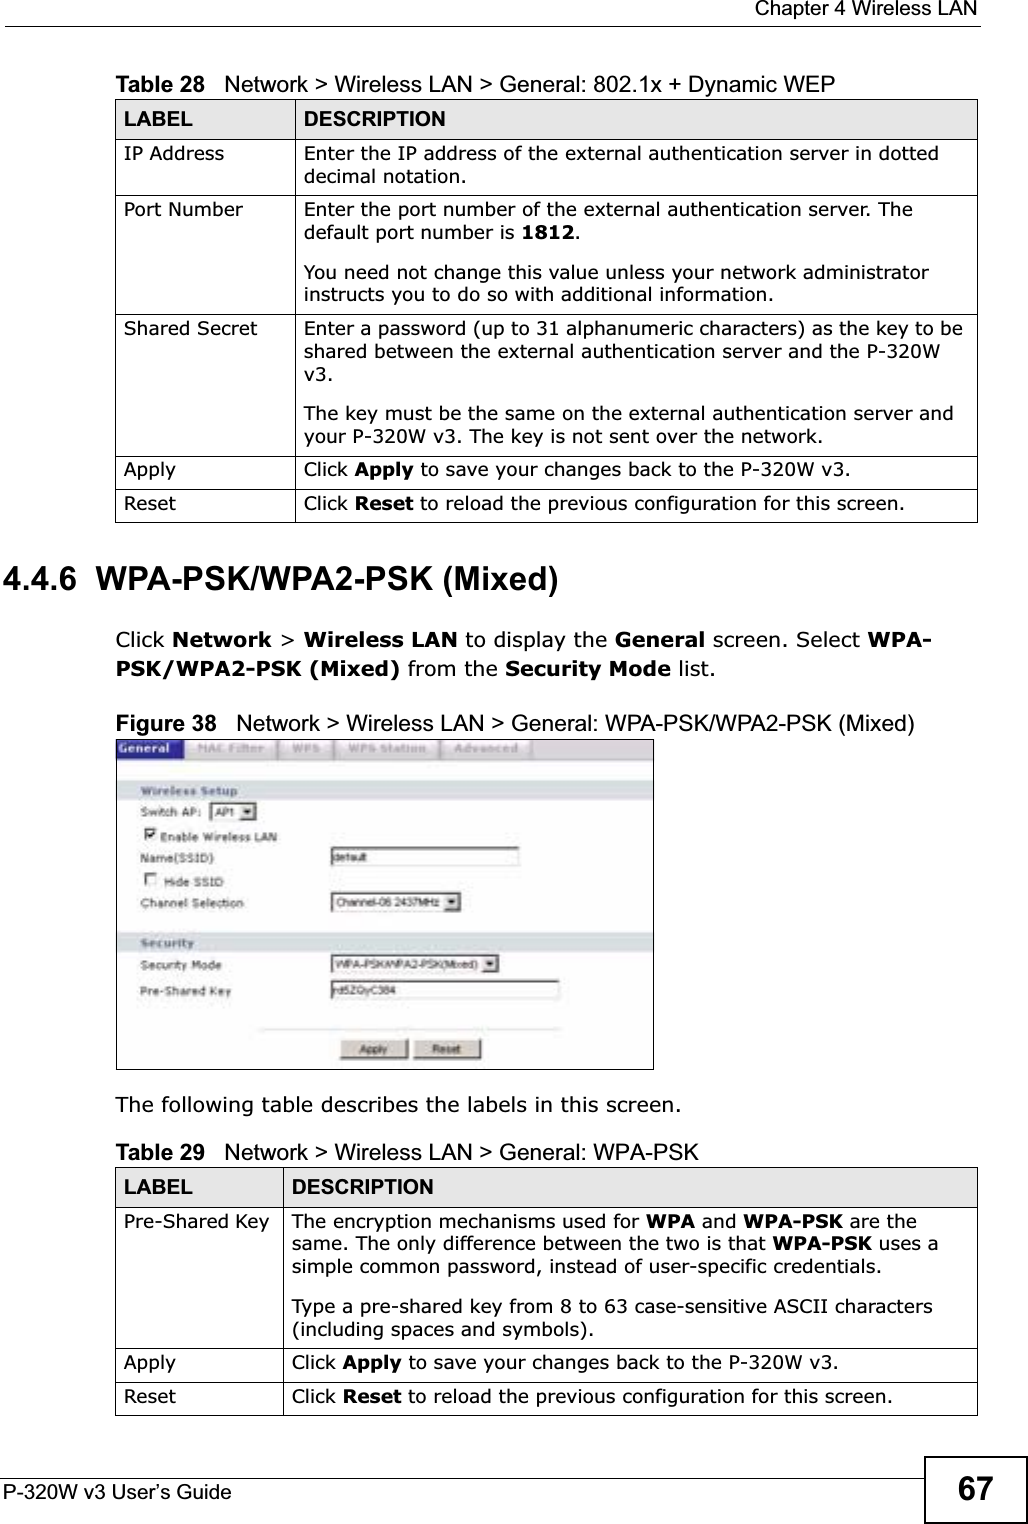  Chapter 4 Wireless LANP-320W v3 User’s Guide 674.4.6  WPA-PSK/WPA2-PSK (Mixed)Click Network &gt; Wireless LAN to display the General screen. Select WPA-PSK/WPA2-PSK (Mixed) from the Security Mode list.Figure 38   Network &gt; Wireless LAN &gt; General: WPA-PSK/WPA2-PSK (Mixed)The following table describes the labels in this screen.IP Address Enter the IP address of the external authentication server in dotted decimal notation.Port Number Enter the port number of the external authentication server. The default port number is 1812.You need not change this value unless your network administrator instructs you to do so with additional information. Shared Secret Enter a password (up to 31 alphanumeric characters) as the key to be shared between the external authentication server and the P-320W v3.The key must be the same on the external authentication server and your P-320W v3. The key is not sent over the network. Apply Click Apply to save your changes back to the P-320W v3.Reset Click Reset to reload the previous configuration for this screen.Table 28   Network &gt; Wireless LAN &gt; General: 802.1x + Dynamic WEPLABEL DESCRIPTIONTable 29   Network &gt; Wireless LAN &gt; General: WPA-PSKLABEL DESCRIPTIONPre-Shared Key  The encryption mechanisms used for WPA and WPA-PSK are the same. The only difference between the two is that WPA-PSK uses a simple common password, instead of user-specific credentials.Type a pre-shared key from 8 to 63 case-sensitive ASCII characters (including spaces and symbols).Apply Click Apply to save your changes back to the P-320W v3.Reset Click Reset to reload the previous configuration for this screen.